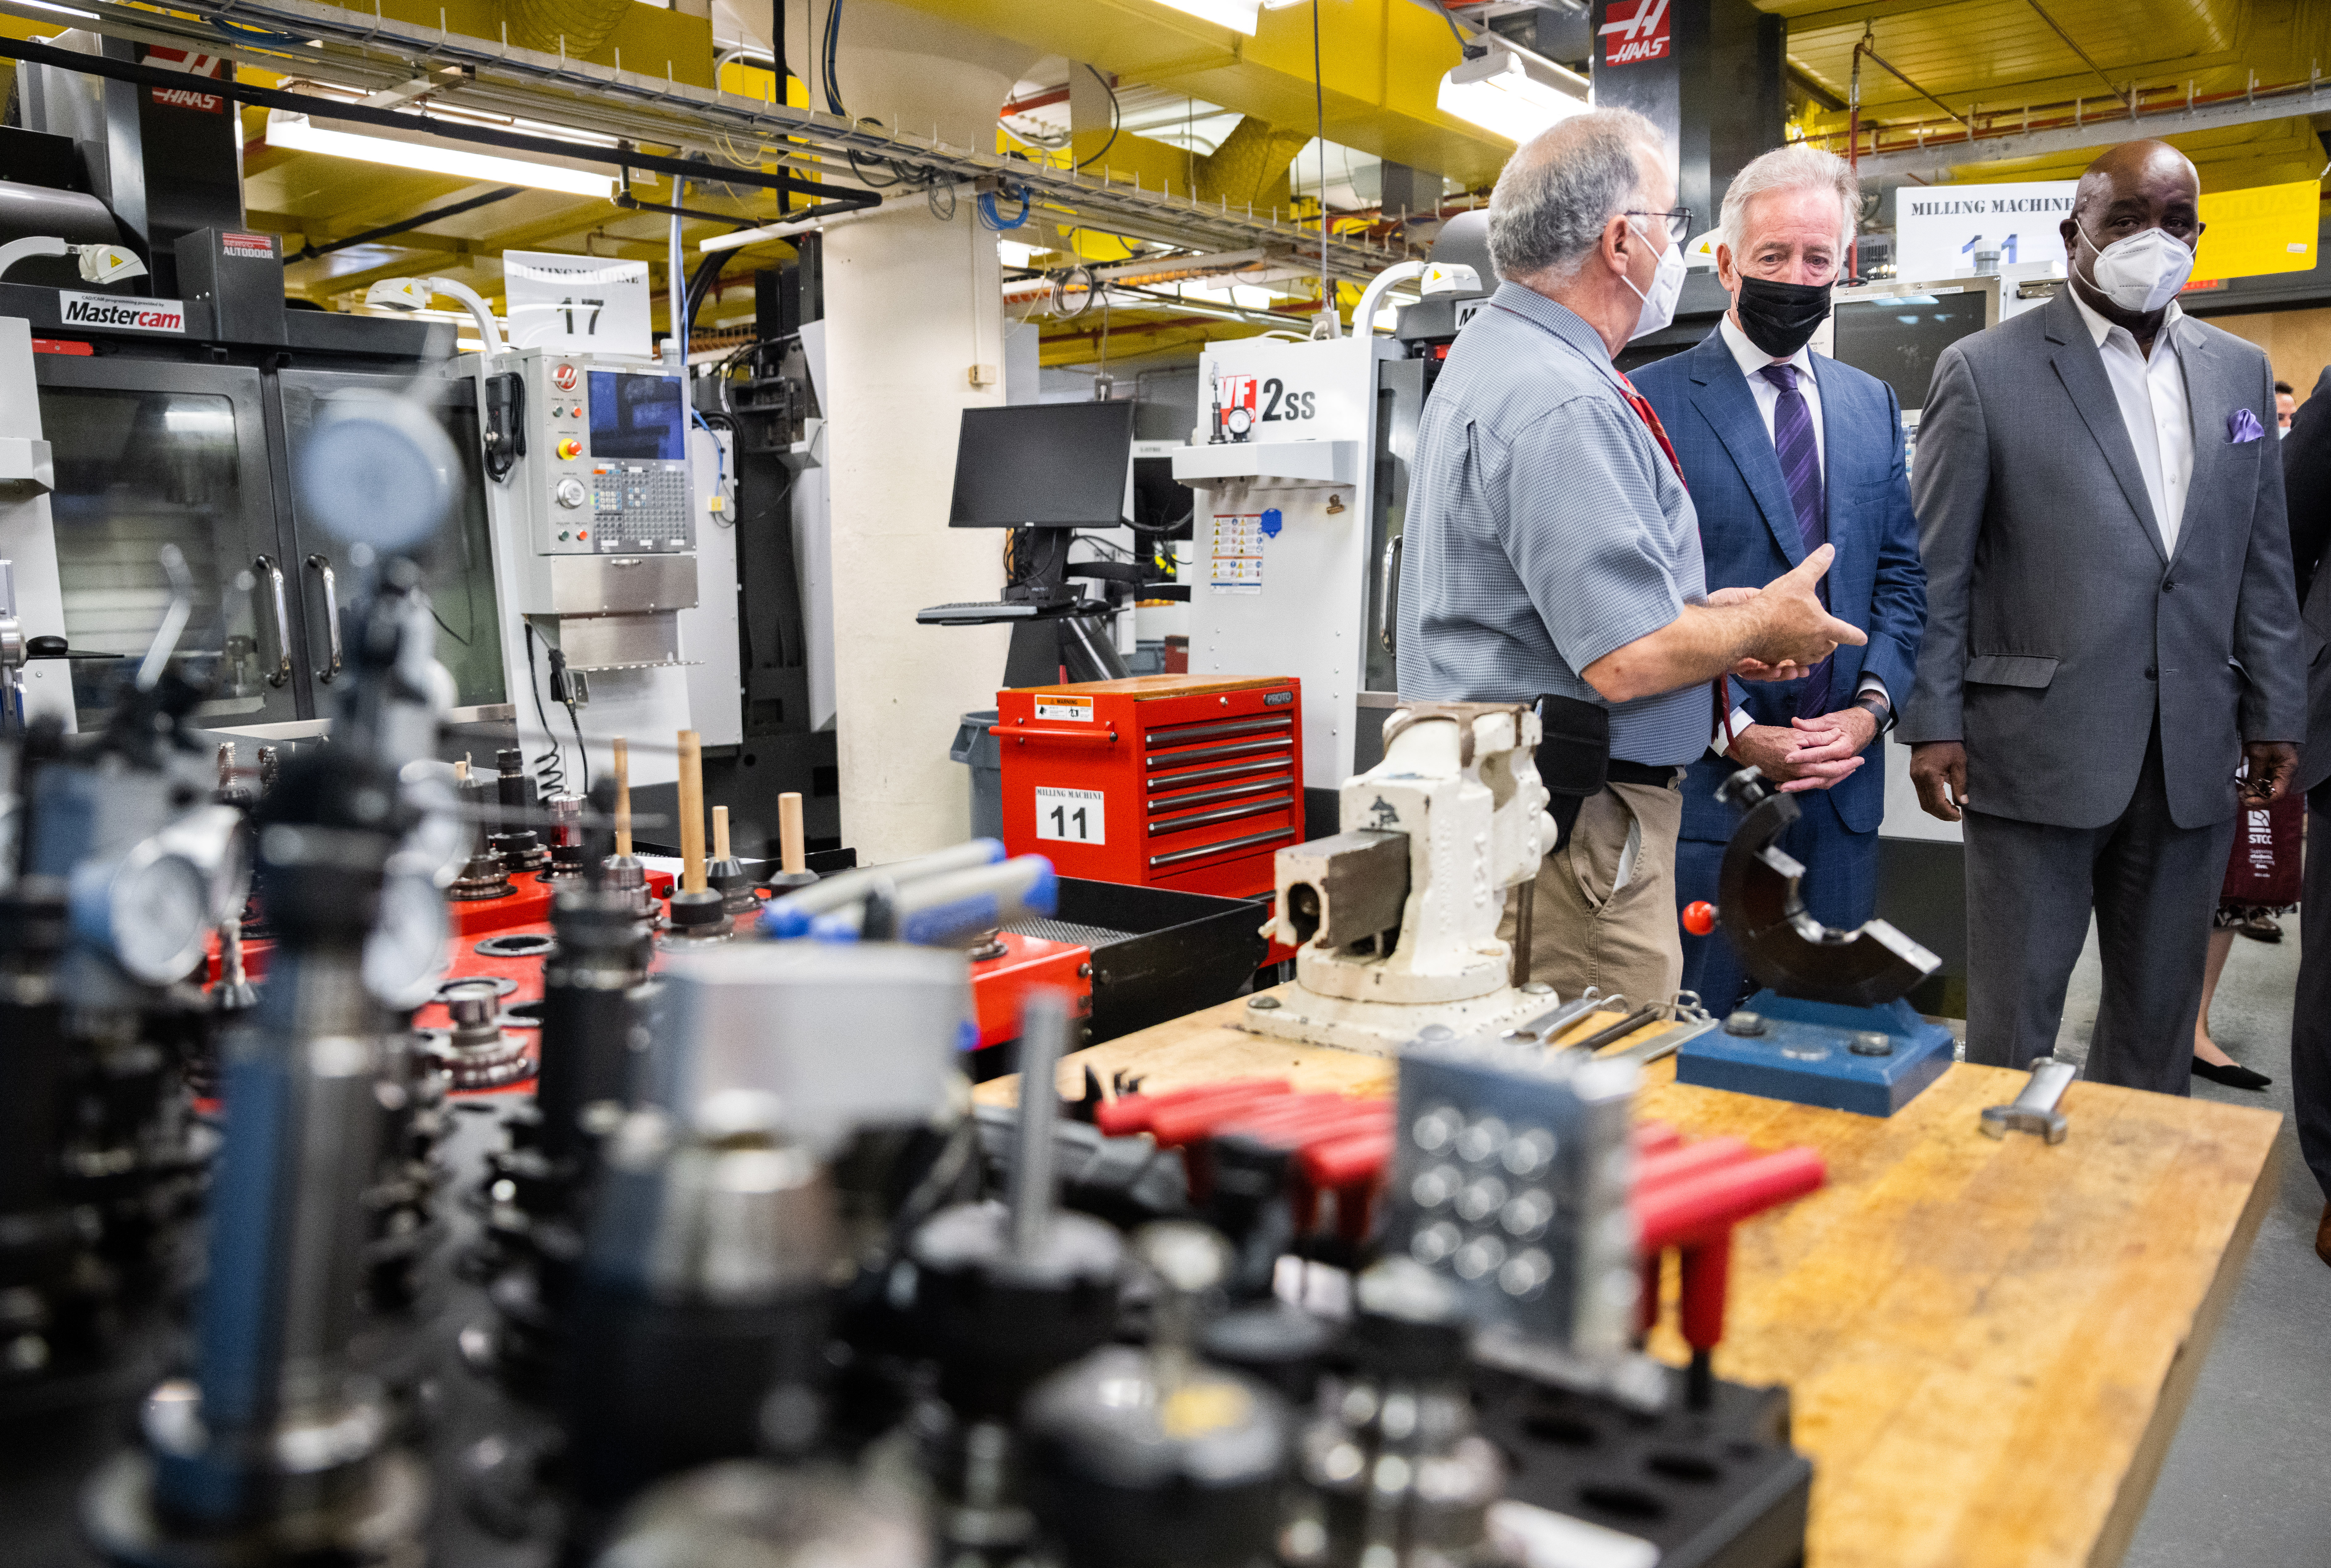 John LaFrancis, Mechanical Engineering Technology professor at Springfield Technical Community College, left, gives a tour of the machine shop to U.S. Rep Richard E. Neal, center, and State Rep. Bud Williams, right, on Thursday, Oct. 6, 2021. (Hoang ‘Leon’ Nguyen / The Republican)